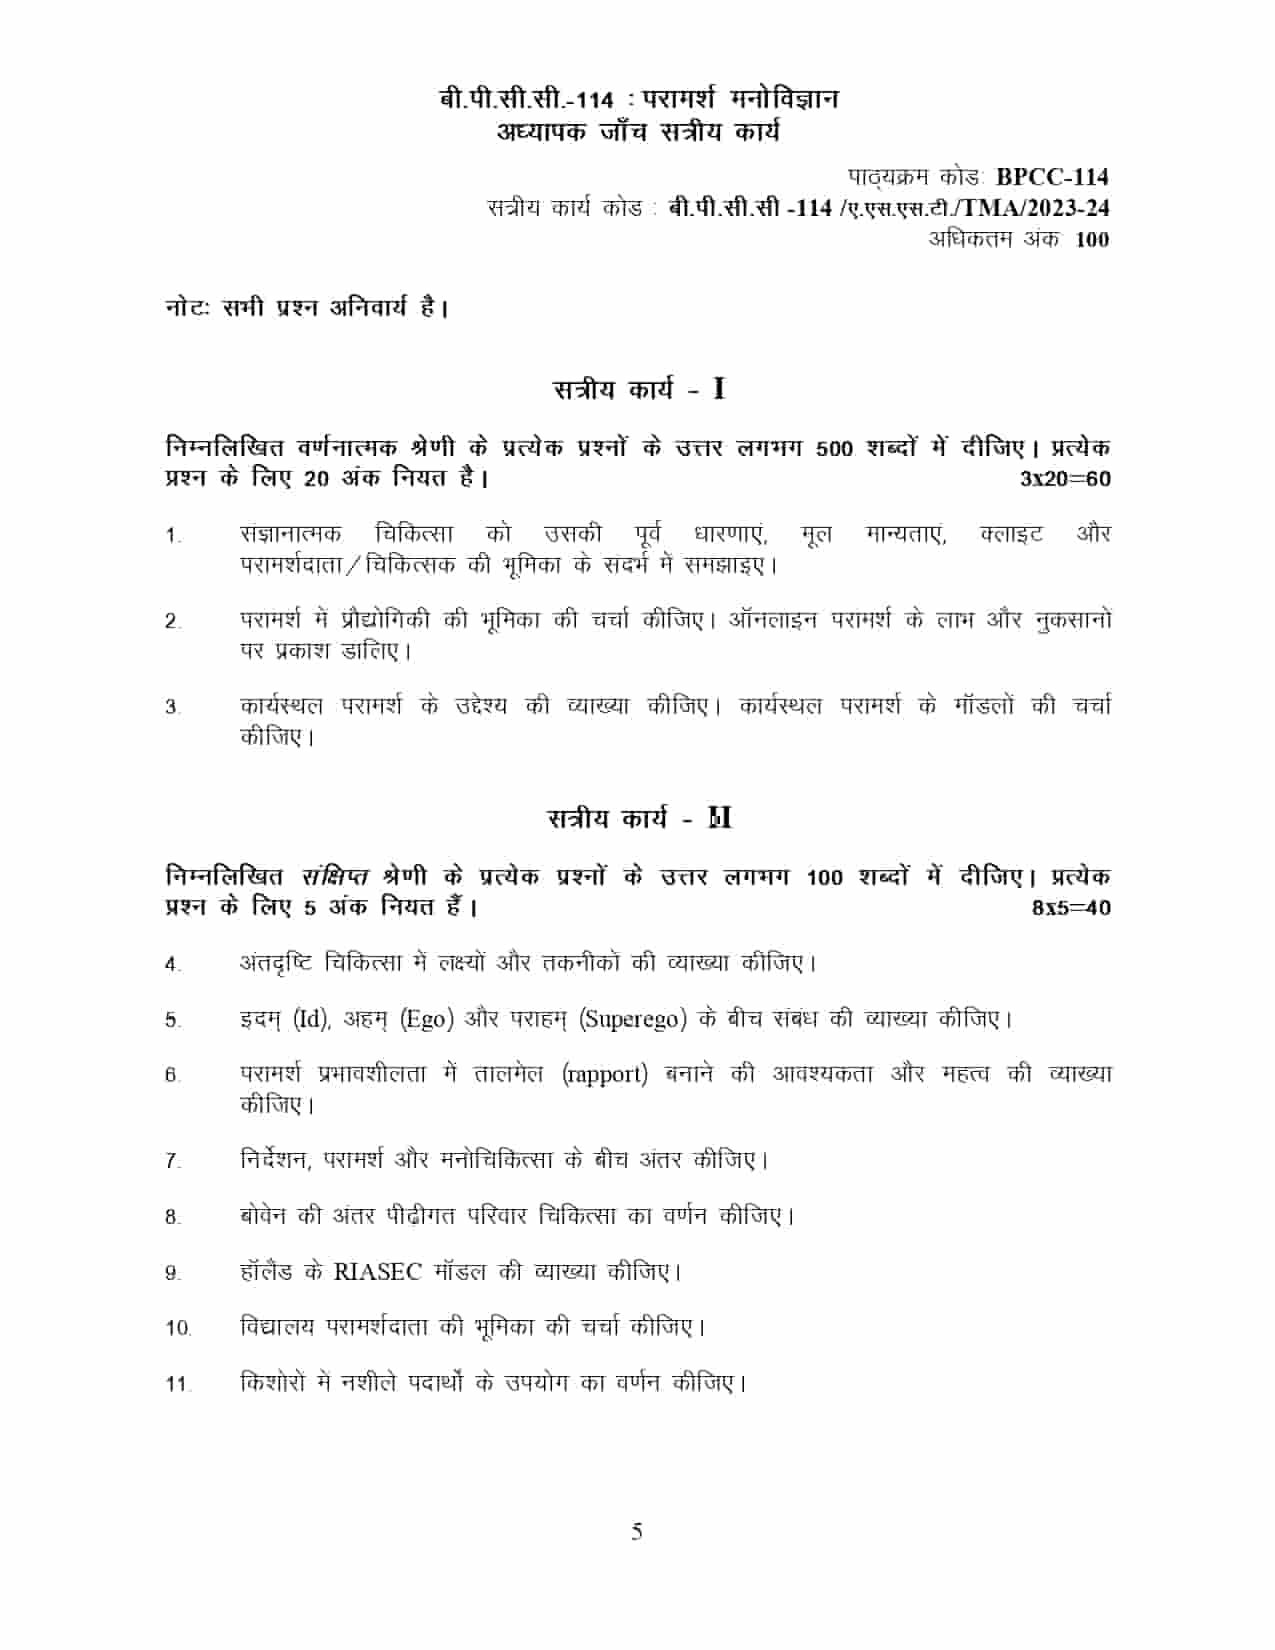 IGNOU BPCC 114 HINDI SOLVED ASSIGNMENT 2023-24